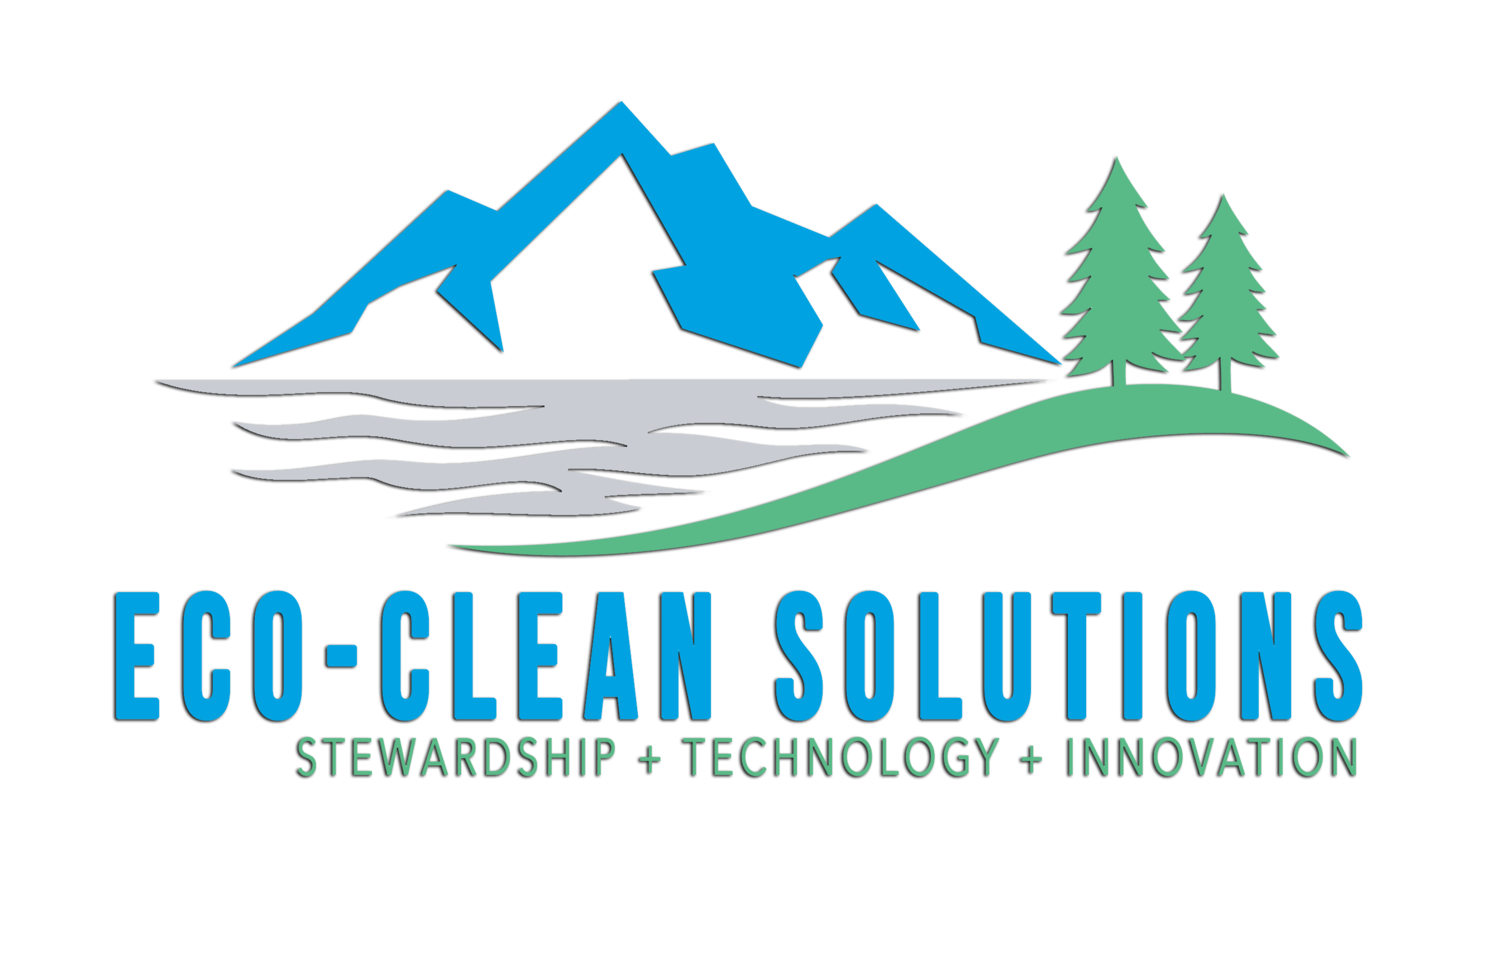 ECO-CLEAN SOLUTIONS